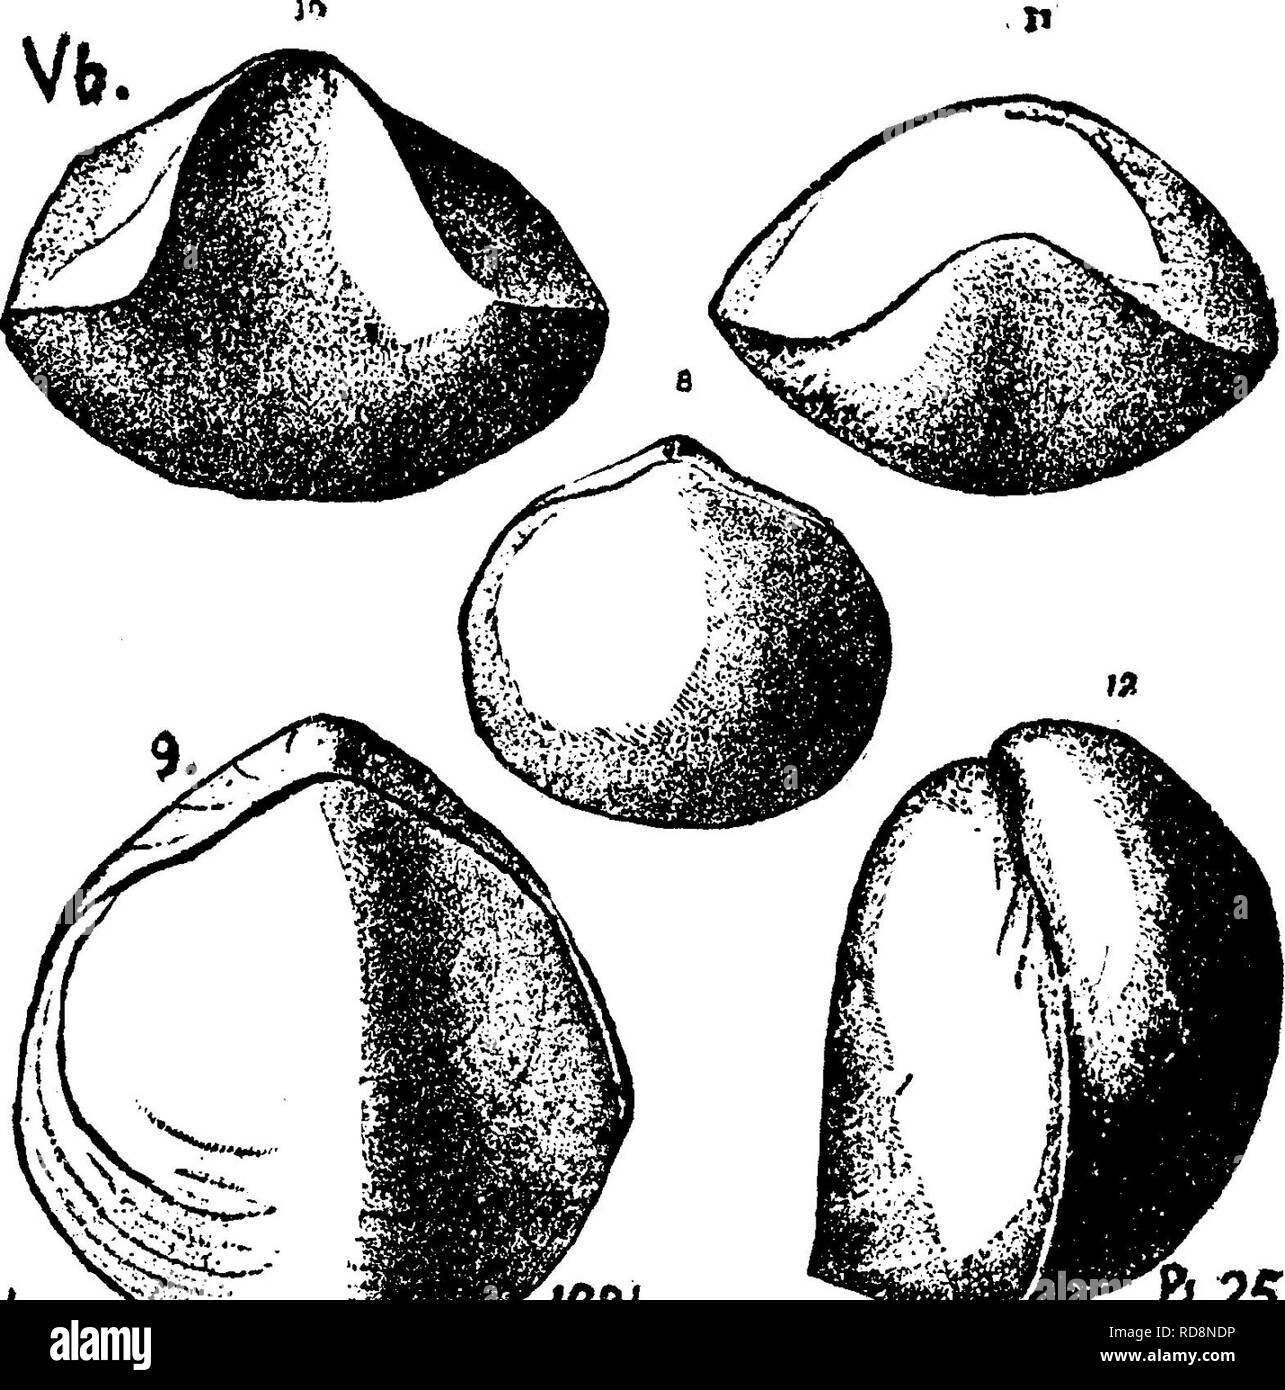 . A dictionary of the fossils of Pennsylvania and neighboring states named in the reports and catalogues of the survey ... Paleontology. Meris. 396 Meristella ? Spec. 890-3, of Sherwood, E. Liberty, Brad- ford Co. Upper Chemung^ VIIIg. Meristina {Meristella) maria, Hall, Pal. N. Y.IV, 1867, p. 299; 28th Rt. Mus. Edit. 1879, pi. 25, figs. 8-12.— Pal. Ohio, Vol. 2, page 132, plate 7, figs. 5, 6. — Figures here taken from CoUett's Indiana report of 1881, p 299, plate 25, fig. 8, back of a young shell, which has not begun to develop the middle groove, and is proportionately broader than old ones ; Stock Photo